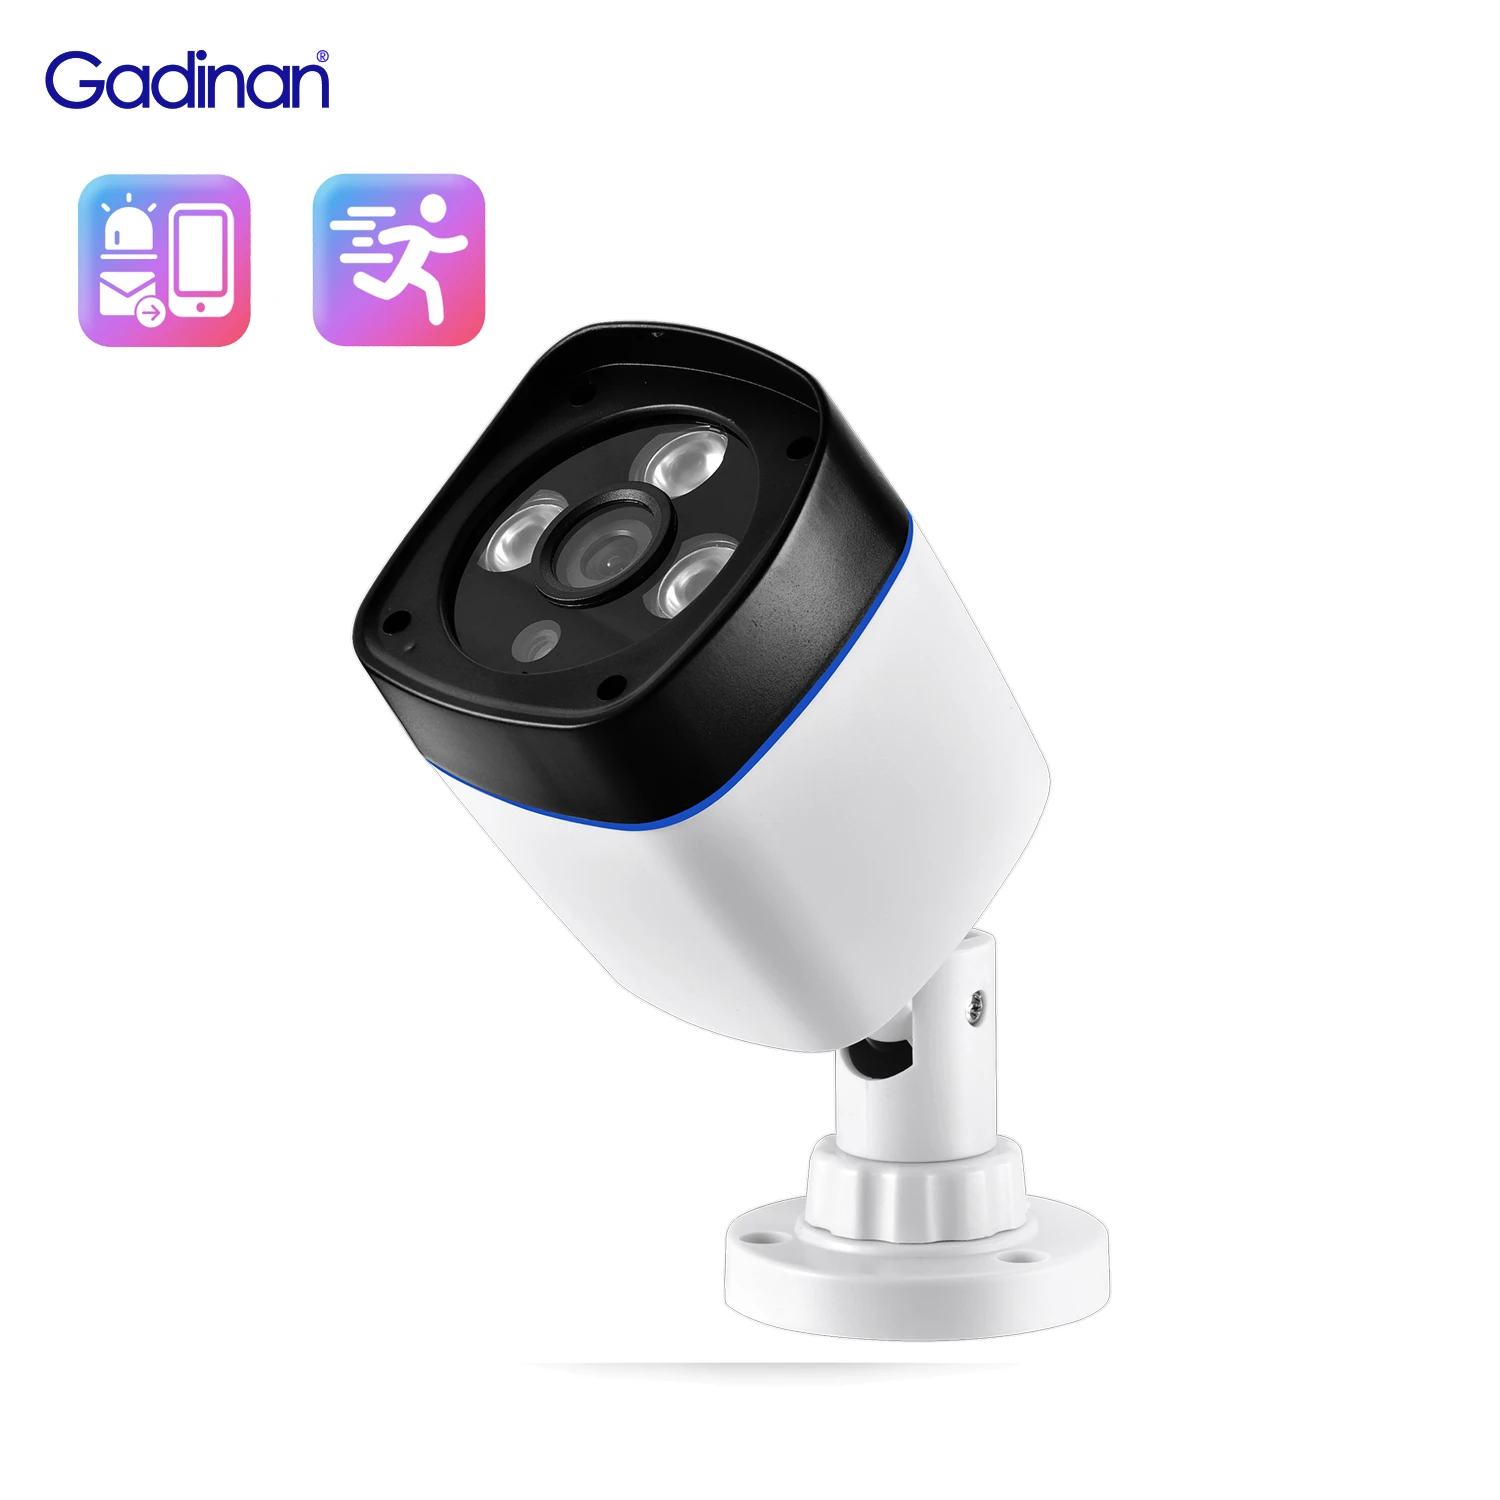 wireless cctv camera for home Gadinan 48V POE 8MP IP Bullet Camera 5MP 3MP H.265 Surveillance 2.8mm Wide Angle Home CCTV Night Vision Outdoor Camera Waterproo best indoor security camera